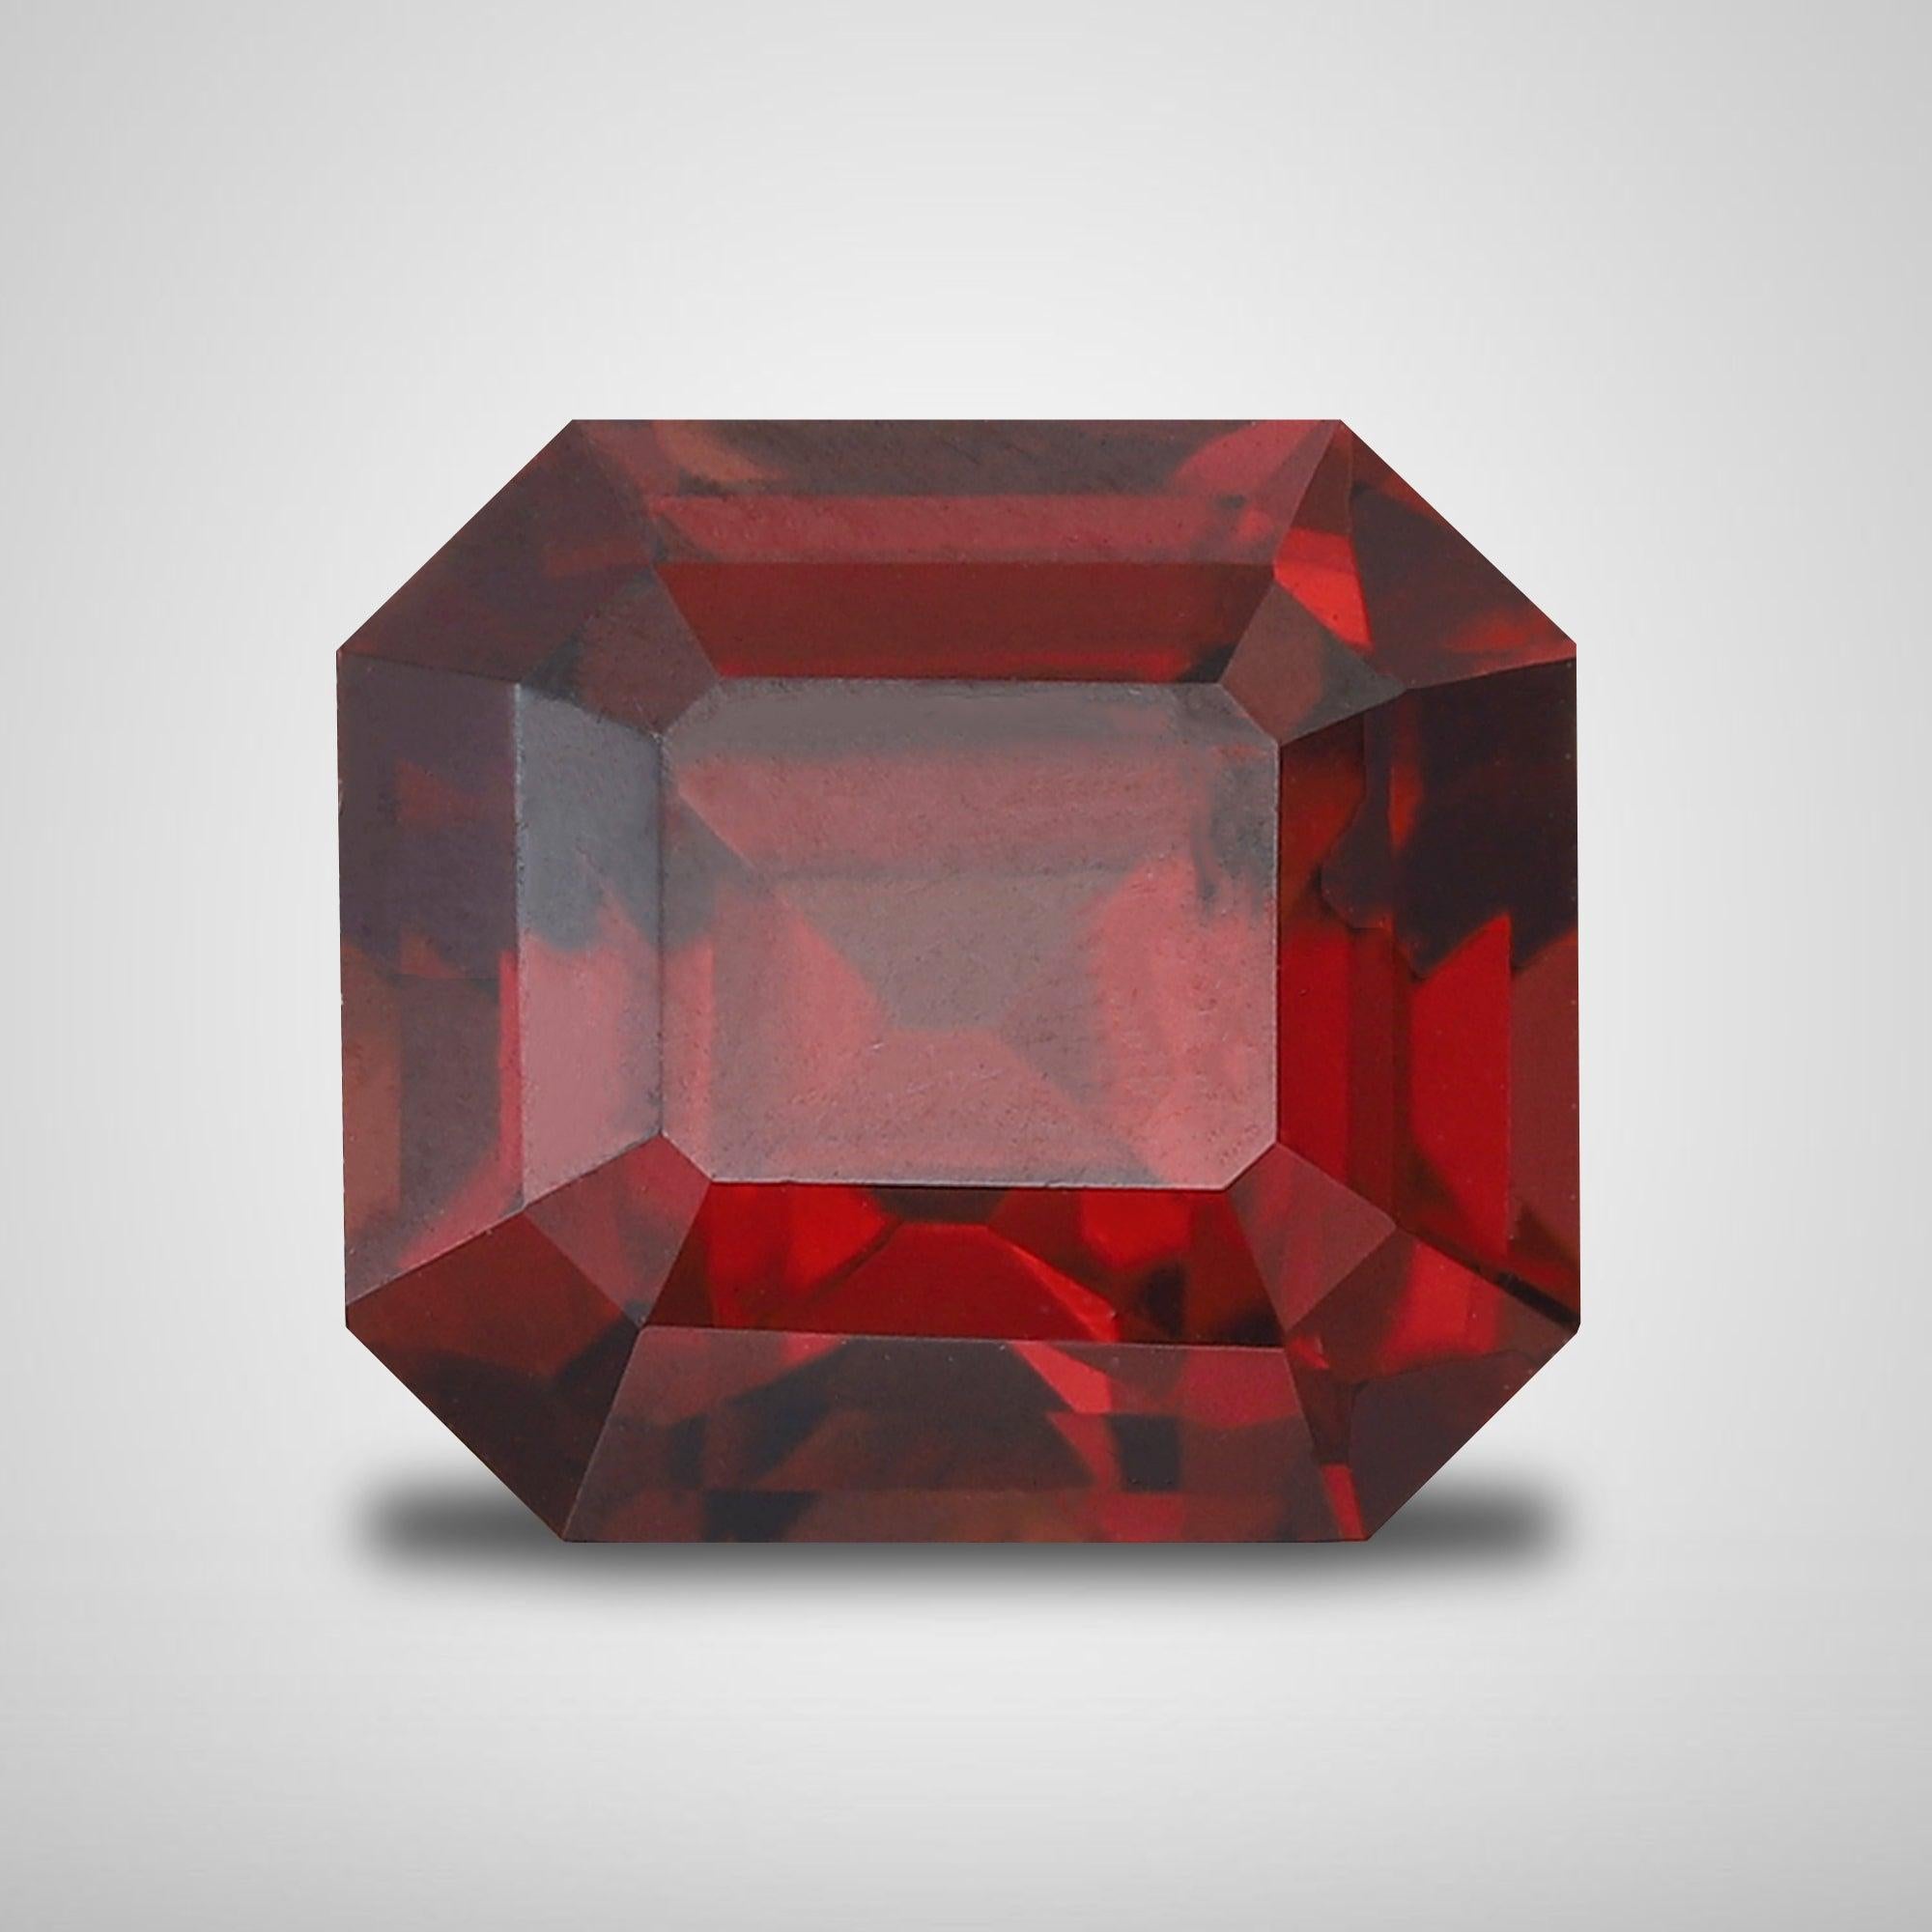 Soft Red Malawi Garnet Stone Jewelry, available for sale at wholesale price, natural high quality, 1.45 carats loose garnet gemstone from Malawi.

Product Information:
GEMSTONE NAME   Soft Red Malawi Garnet stone jewelry
WEIGHT	1.45